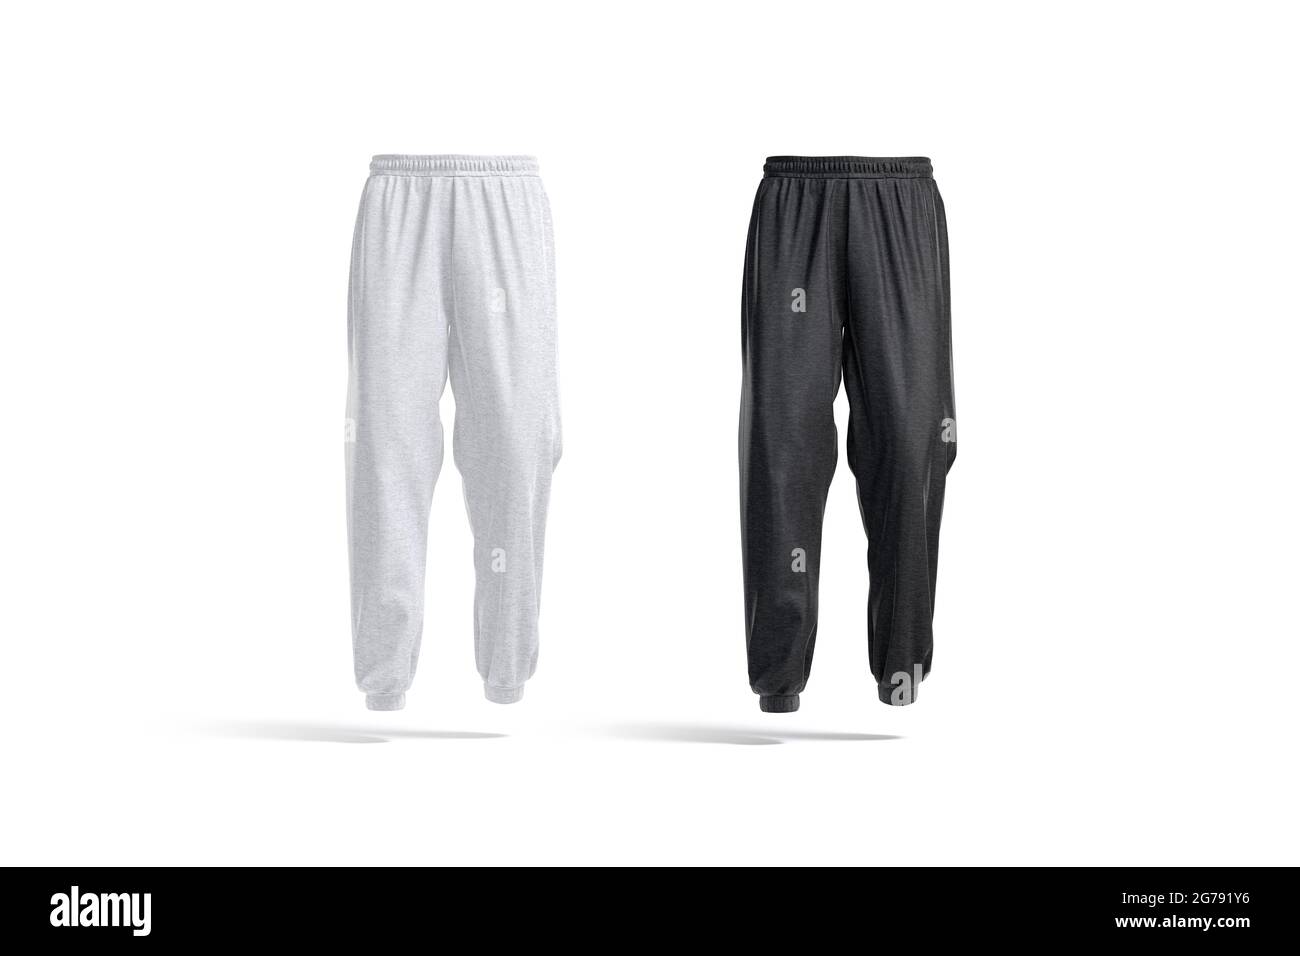 https://c8.alamy.com/comp/2G791Y6/blank-black-and-white-sport-sweatpants-mockup-front-view-3d-rendering-empty-fabric-joggers-for-sporty-outfit-mock-up-isolated-clear-male-or-femal-2G791Y6.jpg